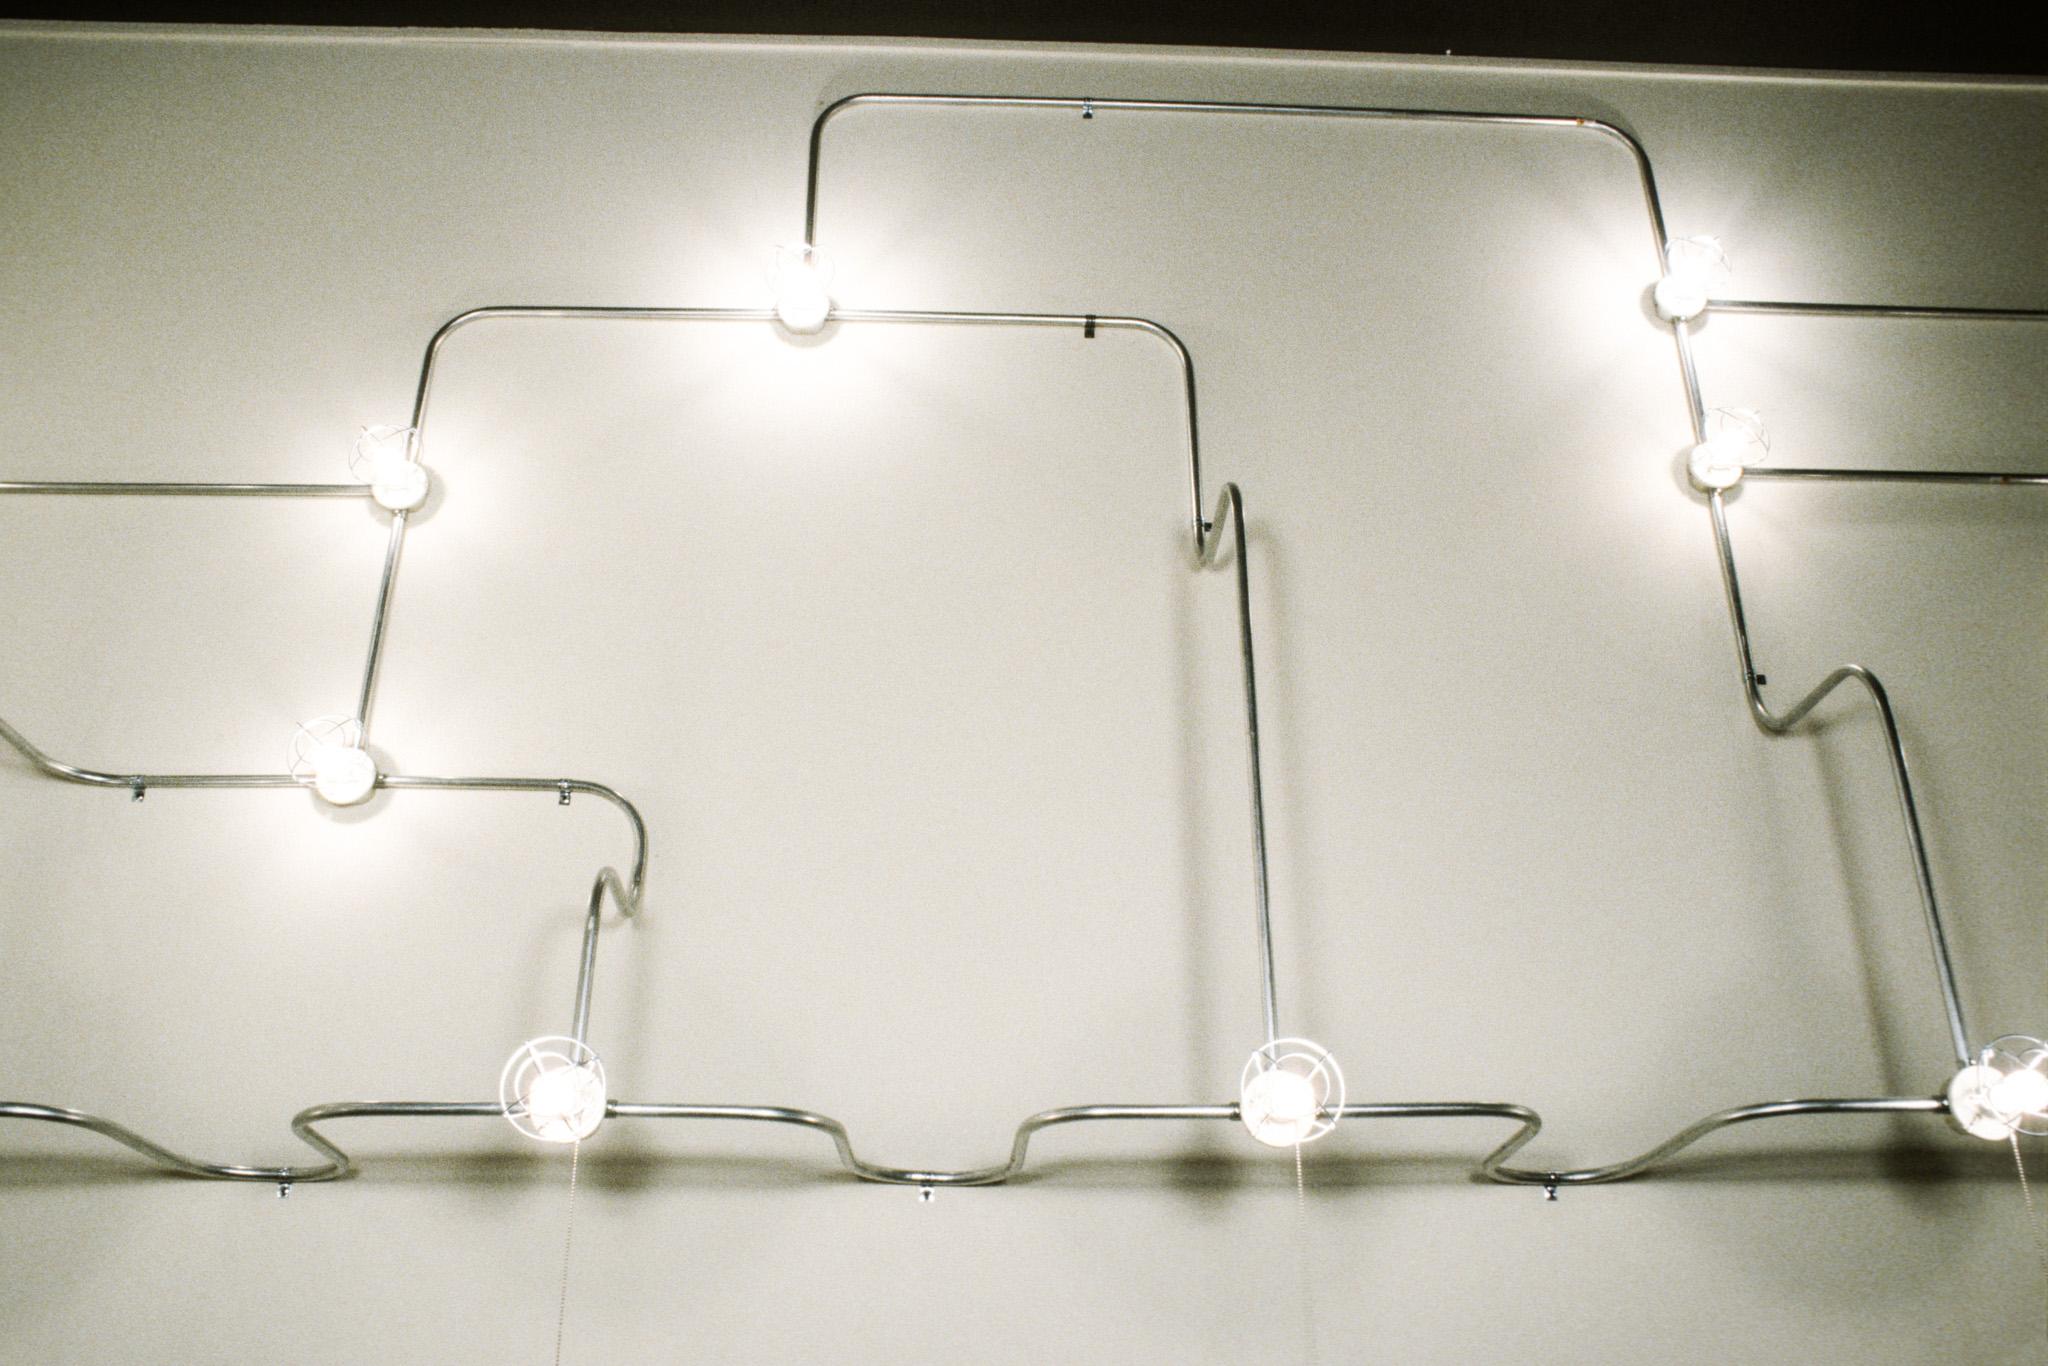 Nancy Holt's sculpture Electrical Lighting for Reading Room made of lightbulbs and conduit along three walls